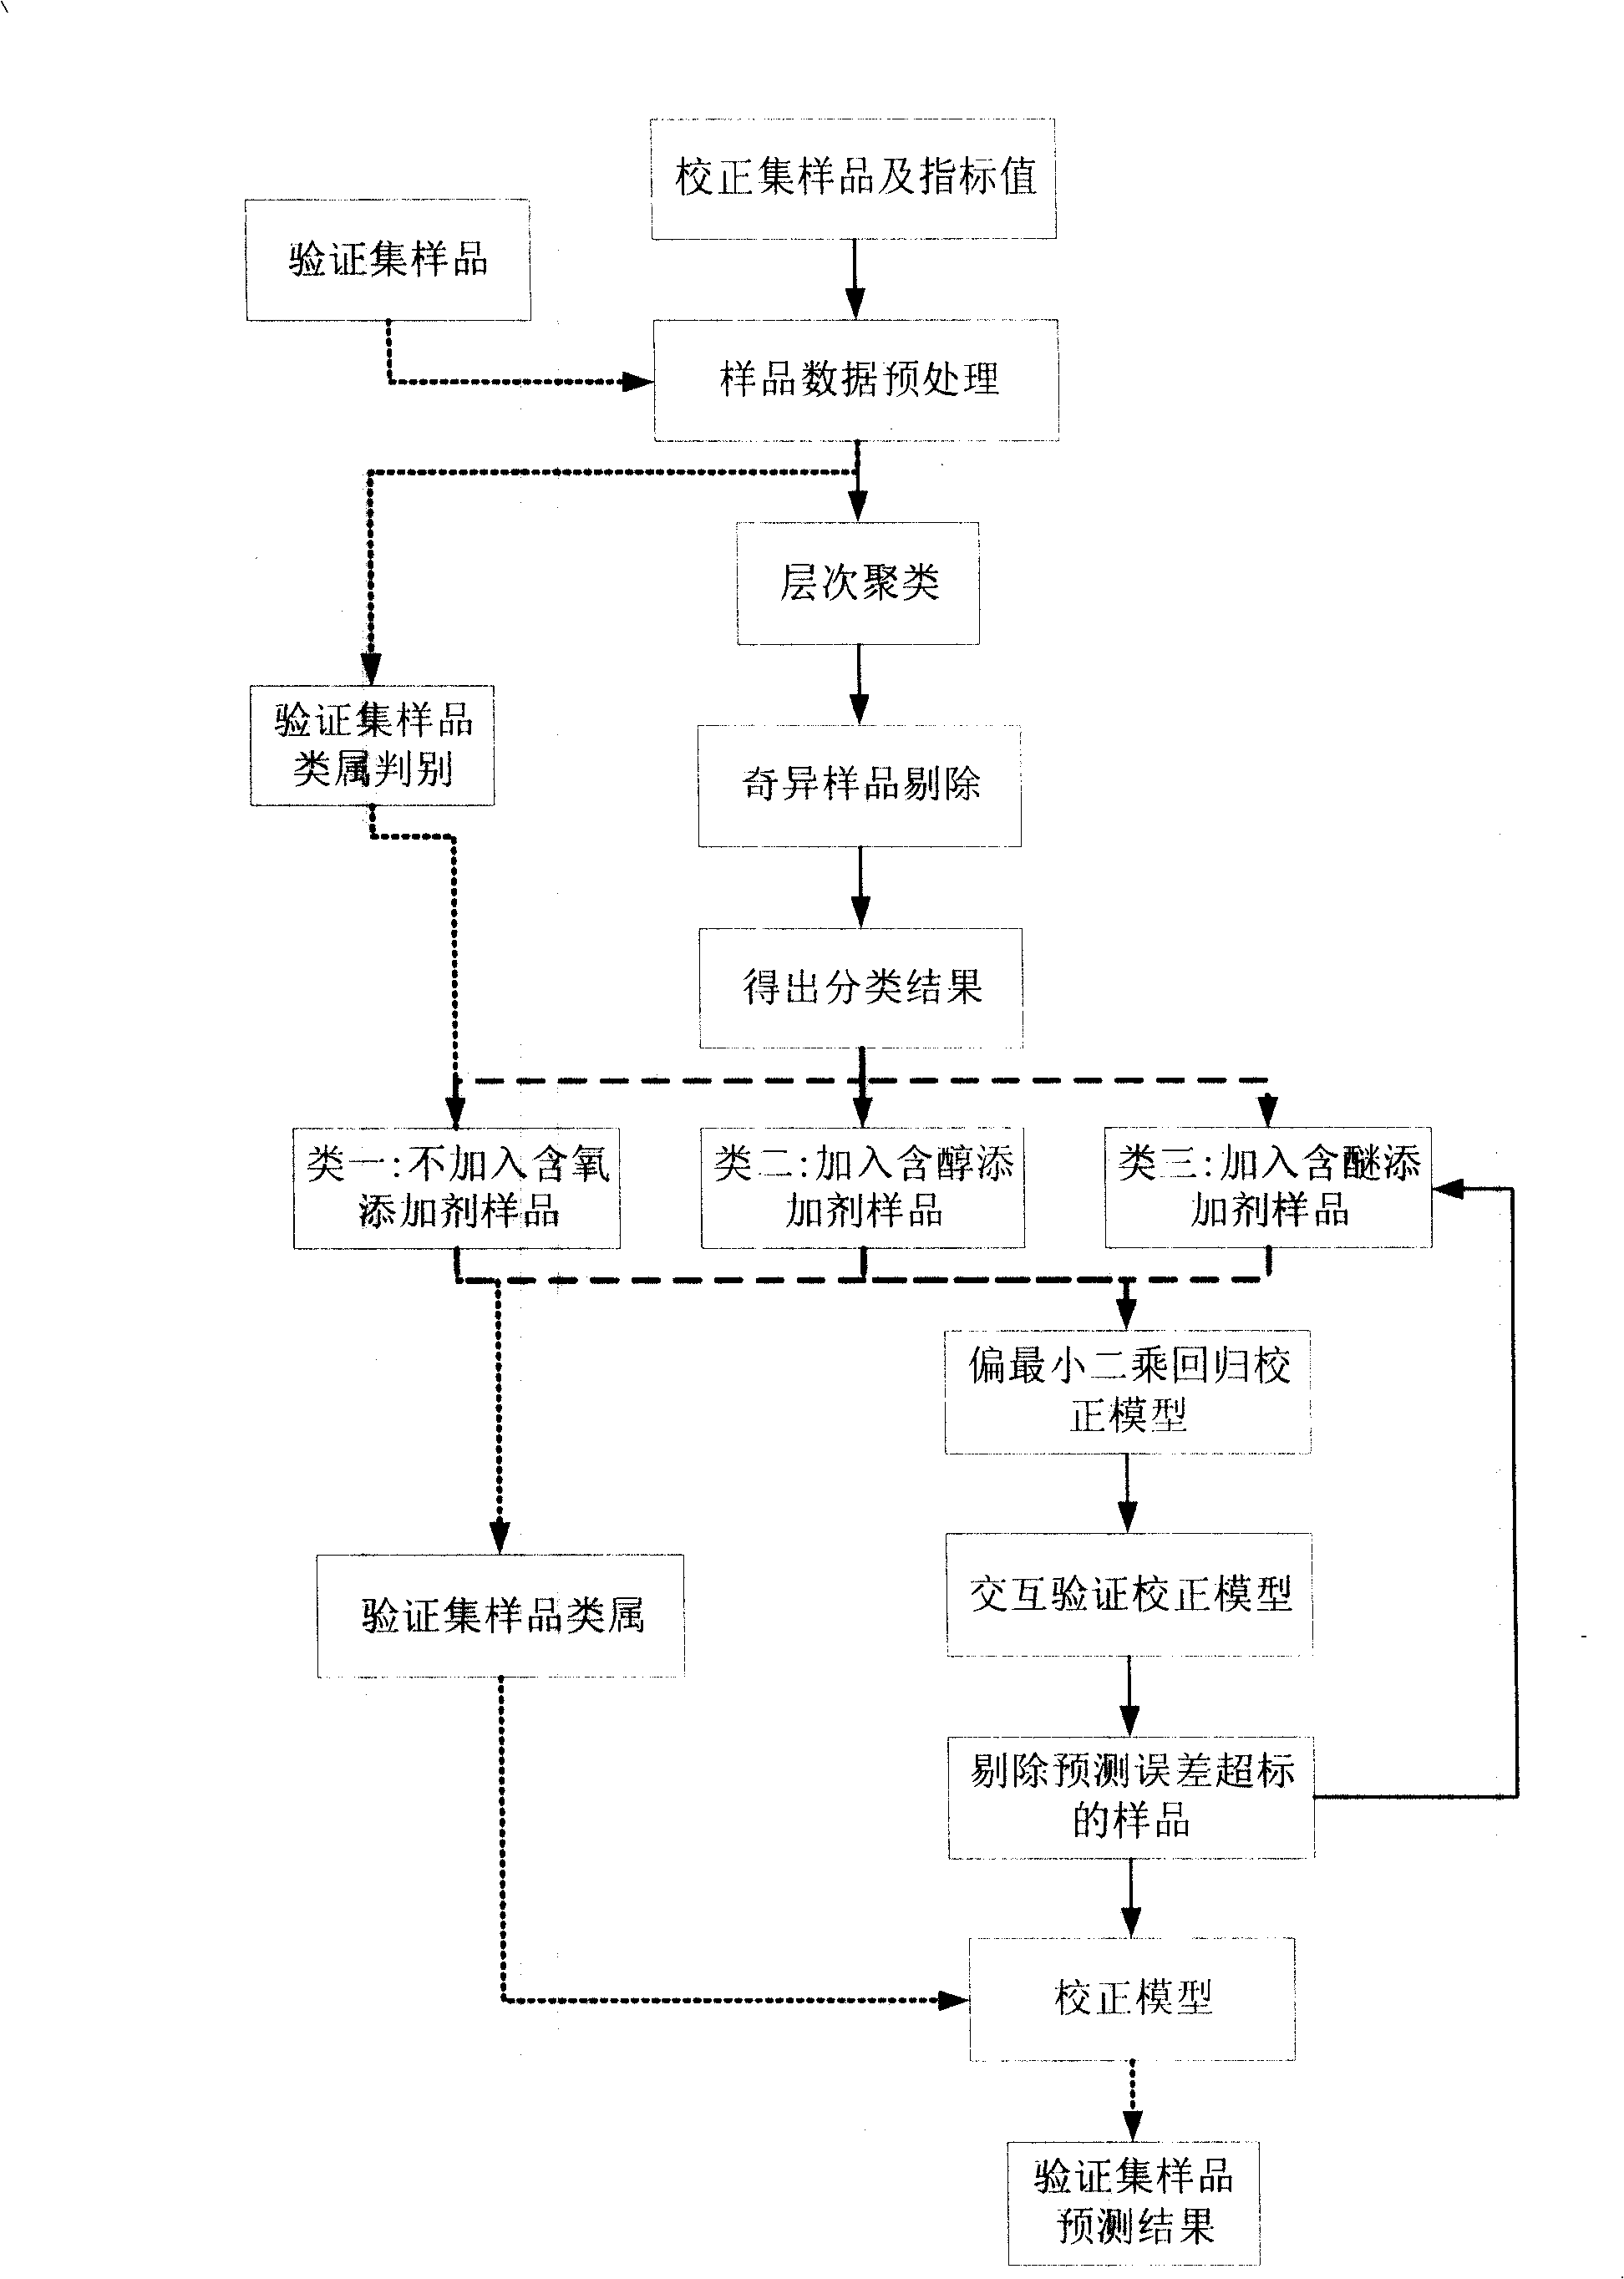 Method for determining octane number based on dielectric spectra technology